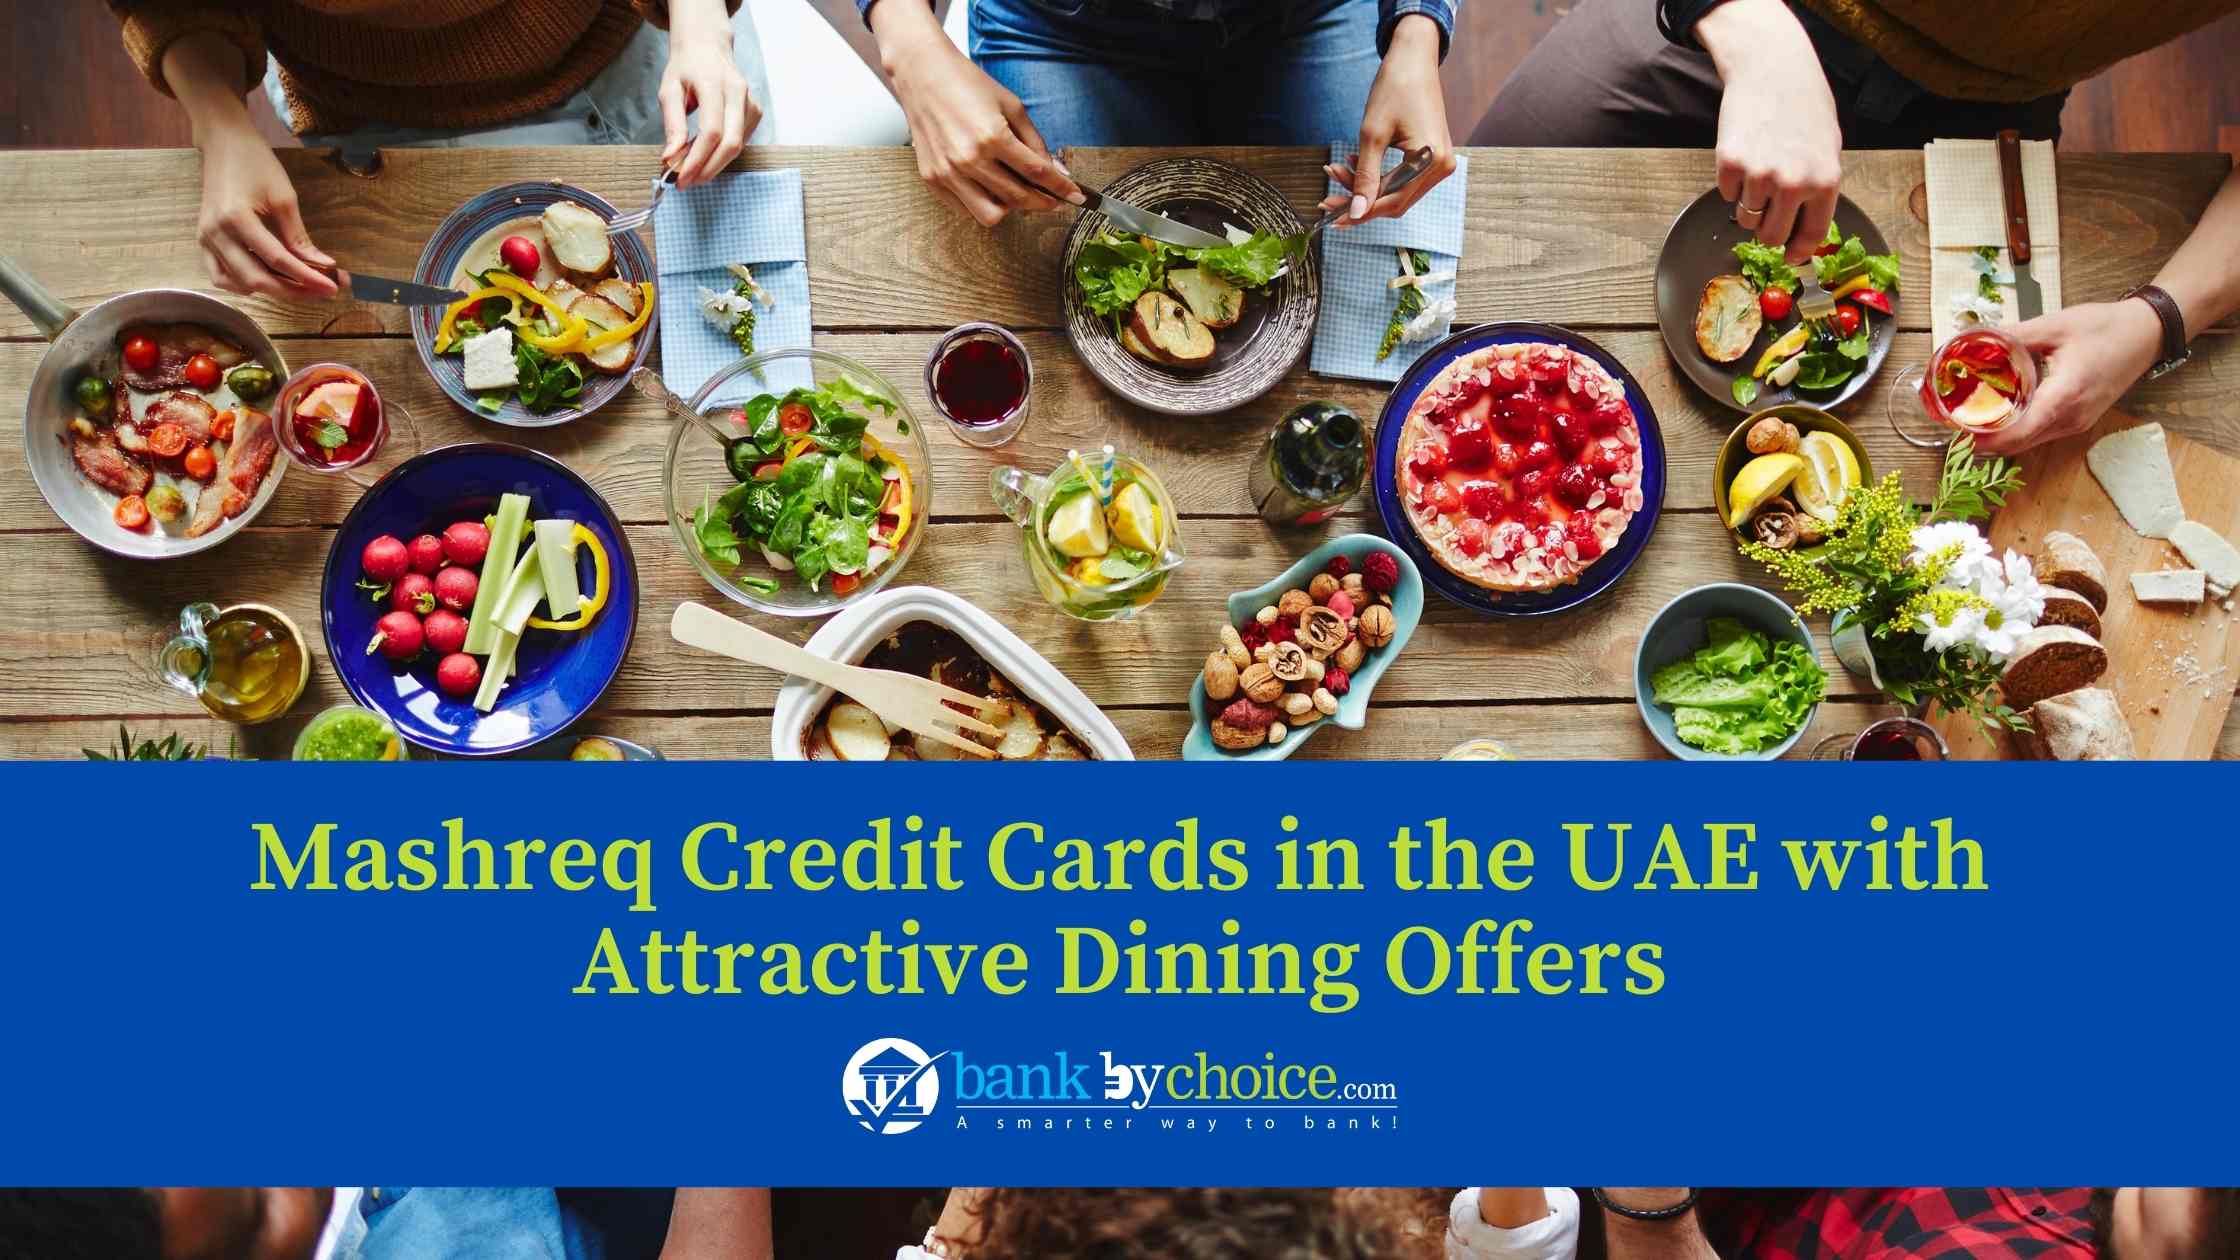 Best credit card for Dining- bankbychoice